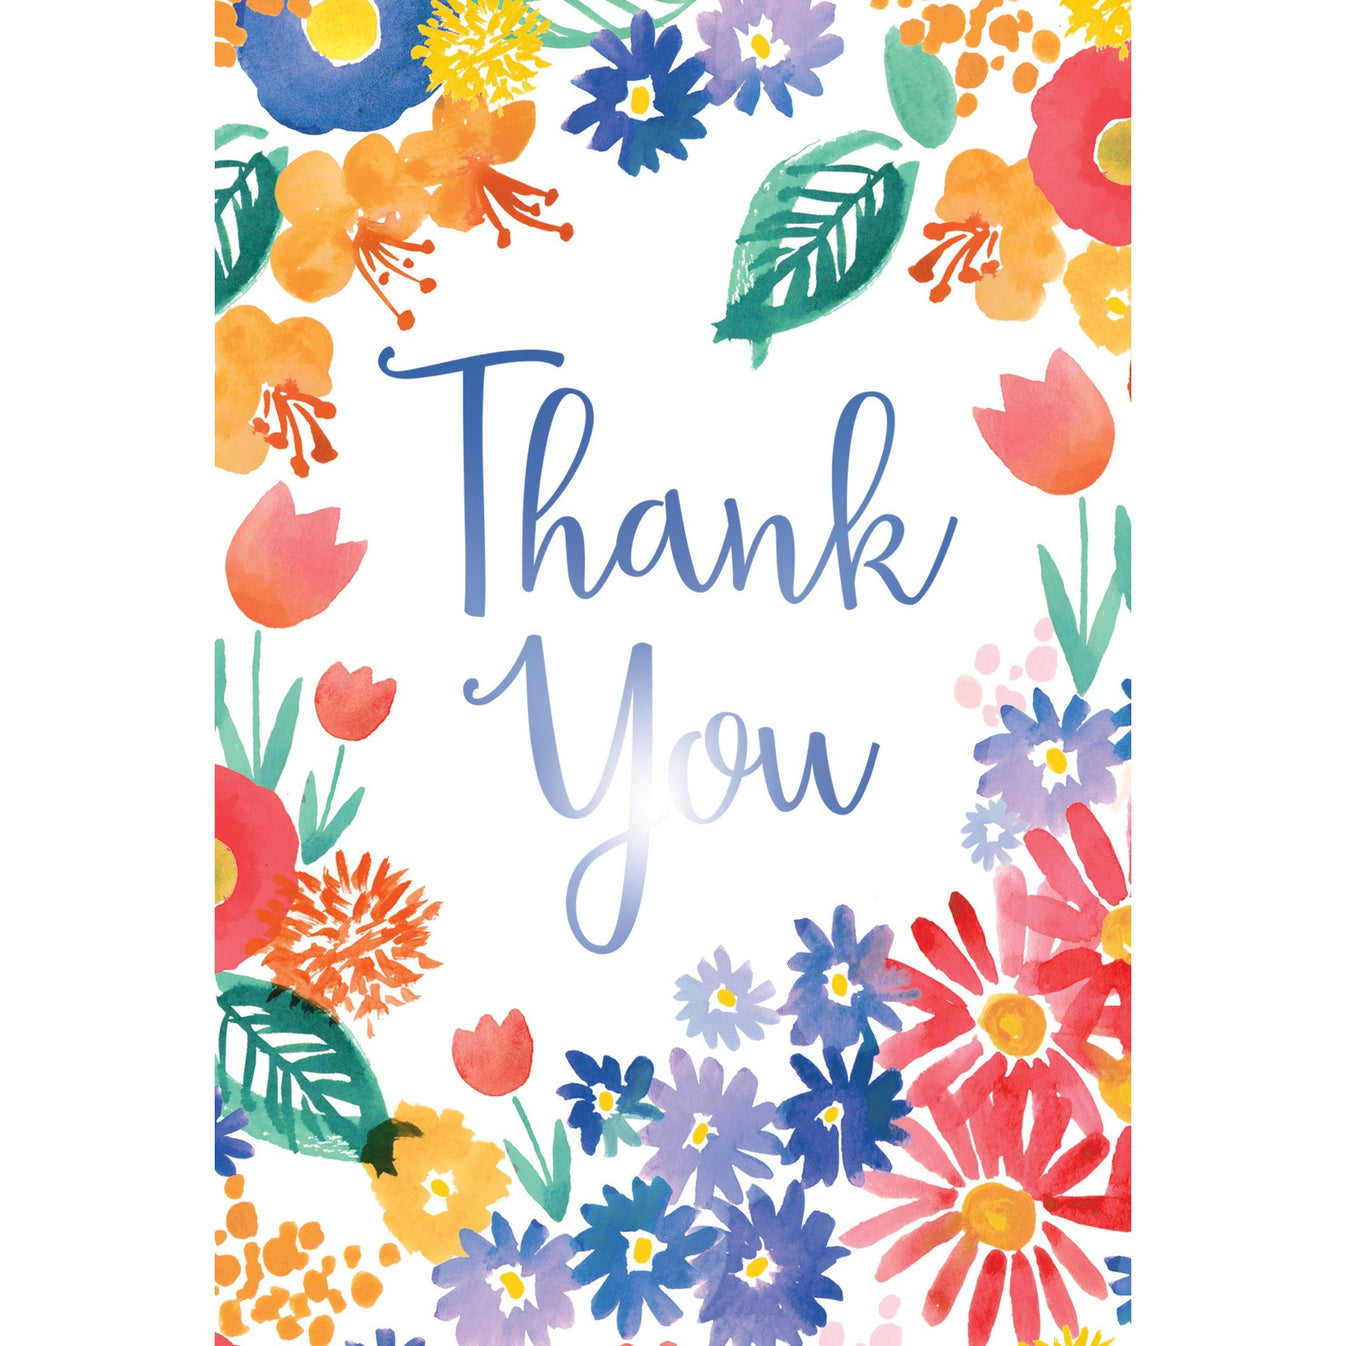 Spring Floral Thank You Card Pictura USA Greeting Cards – Cardmore